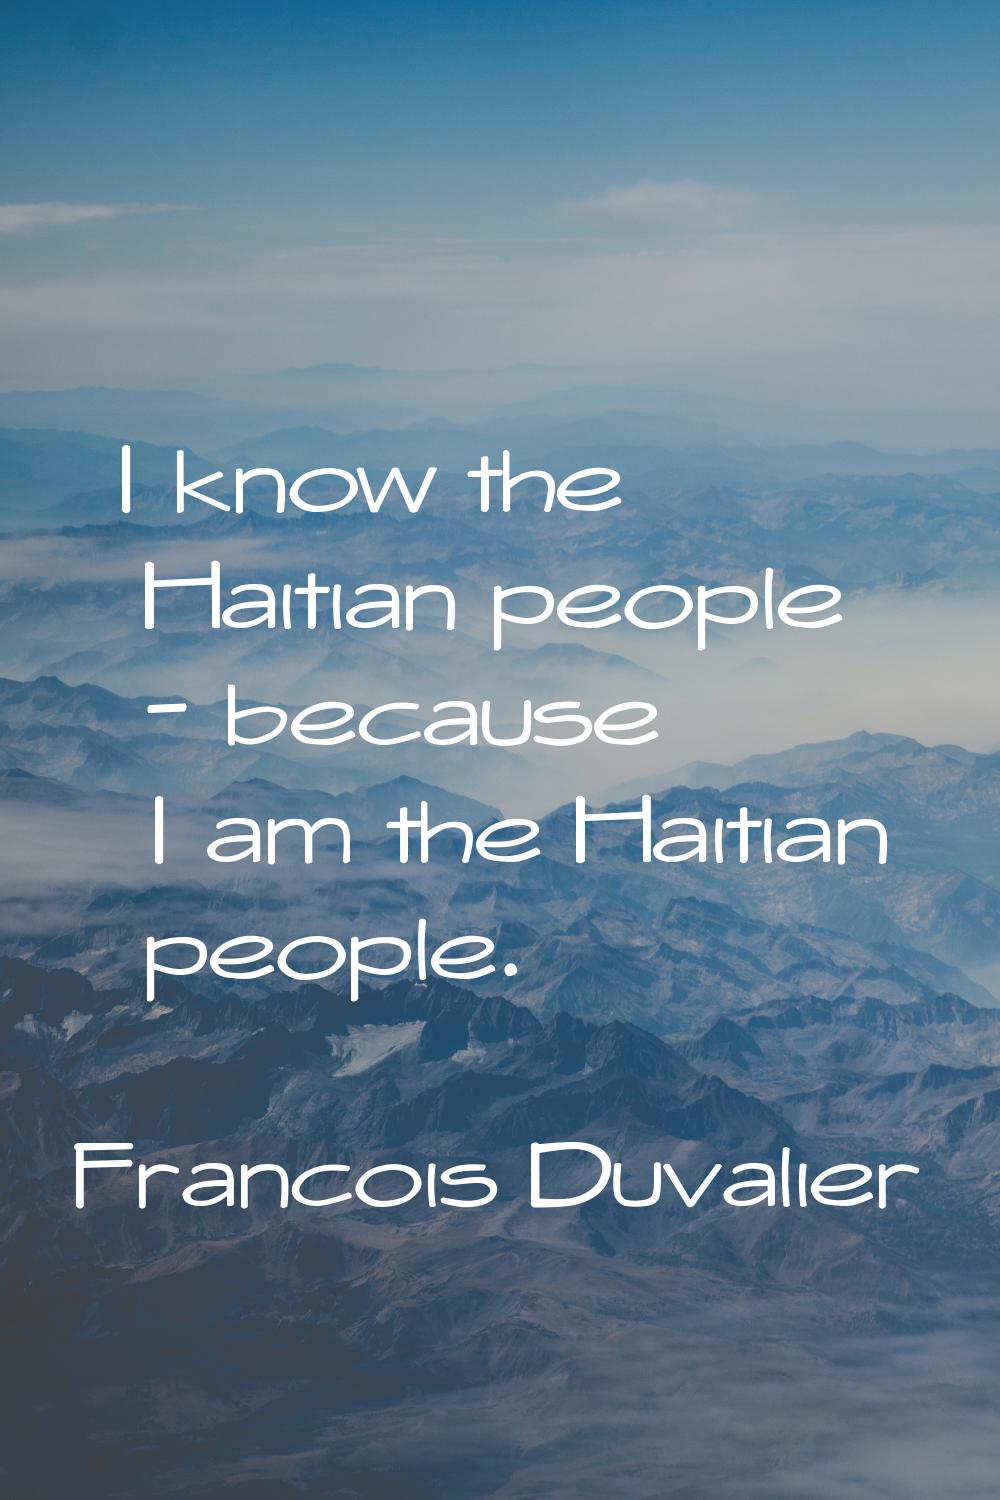 I know the Haitian people - because I am the Haitian people.